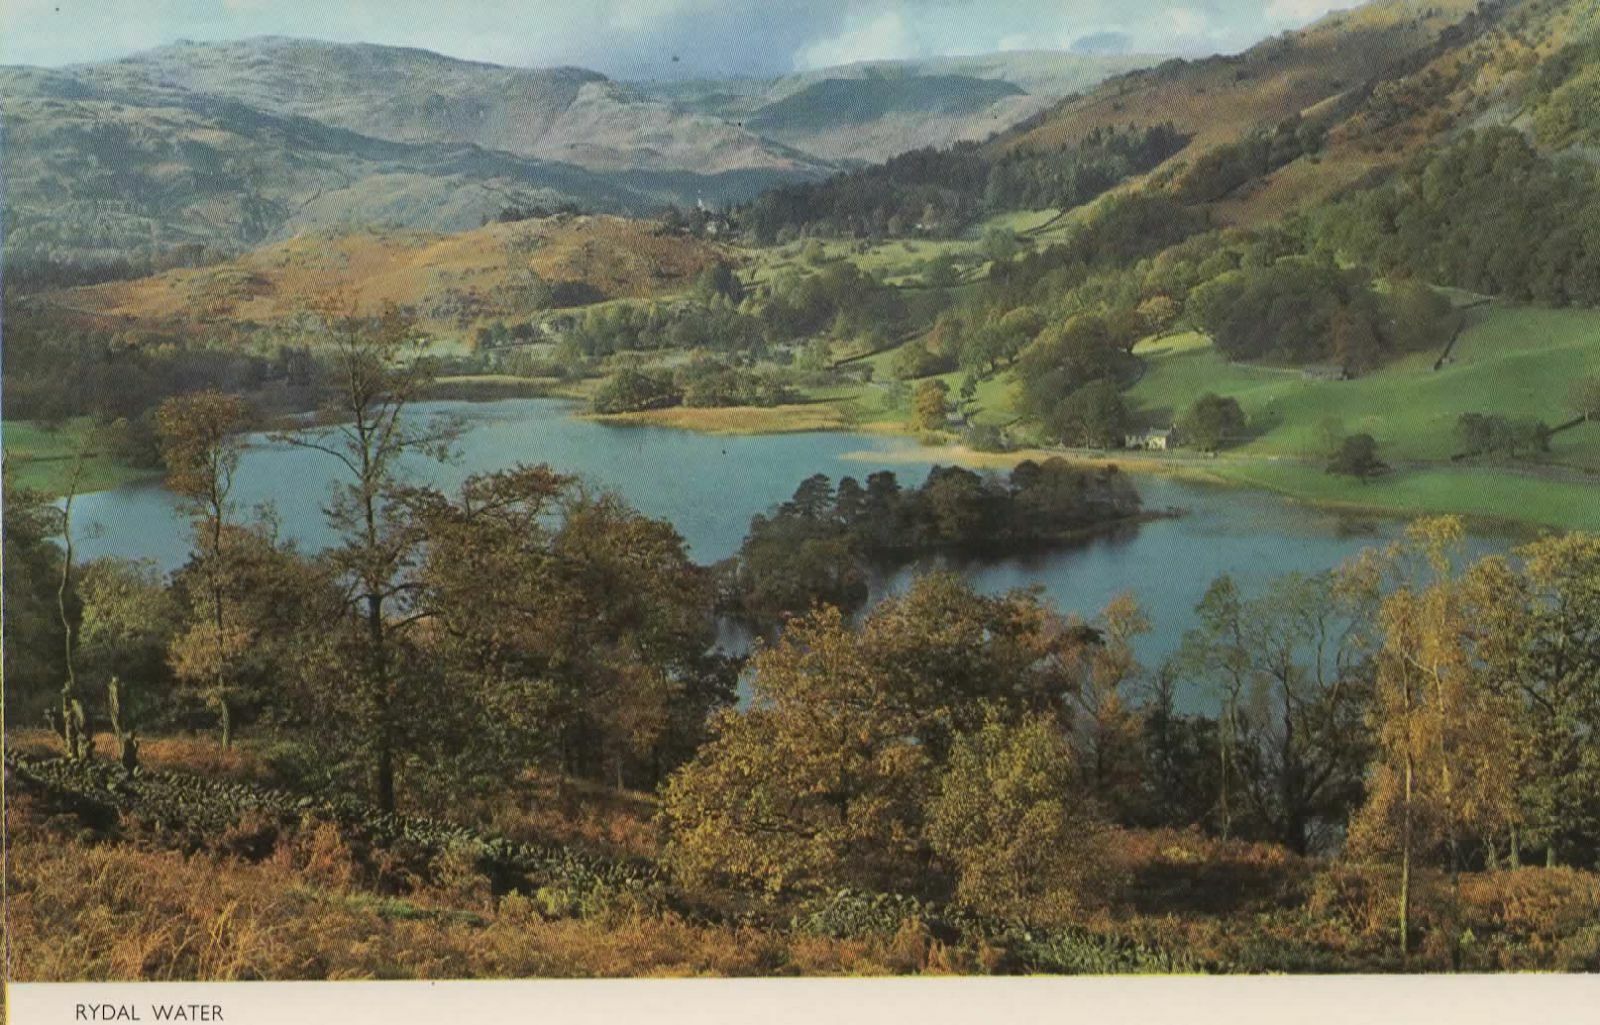 House Clearance - Lakeland Service "Rydal Water" (Unused) Published by Cotman-Color